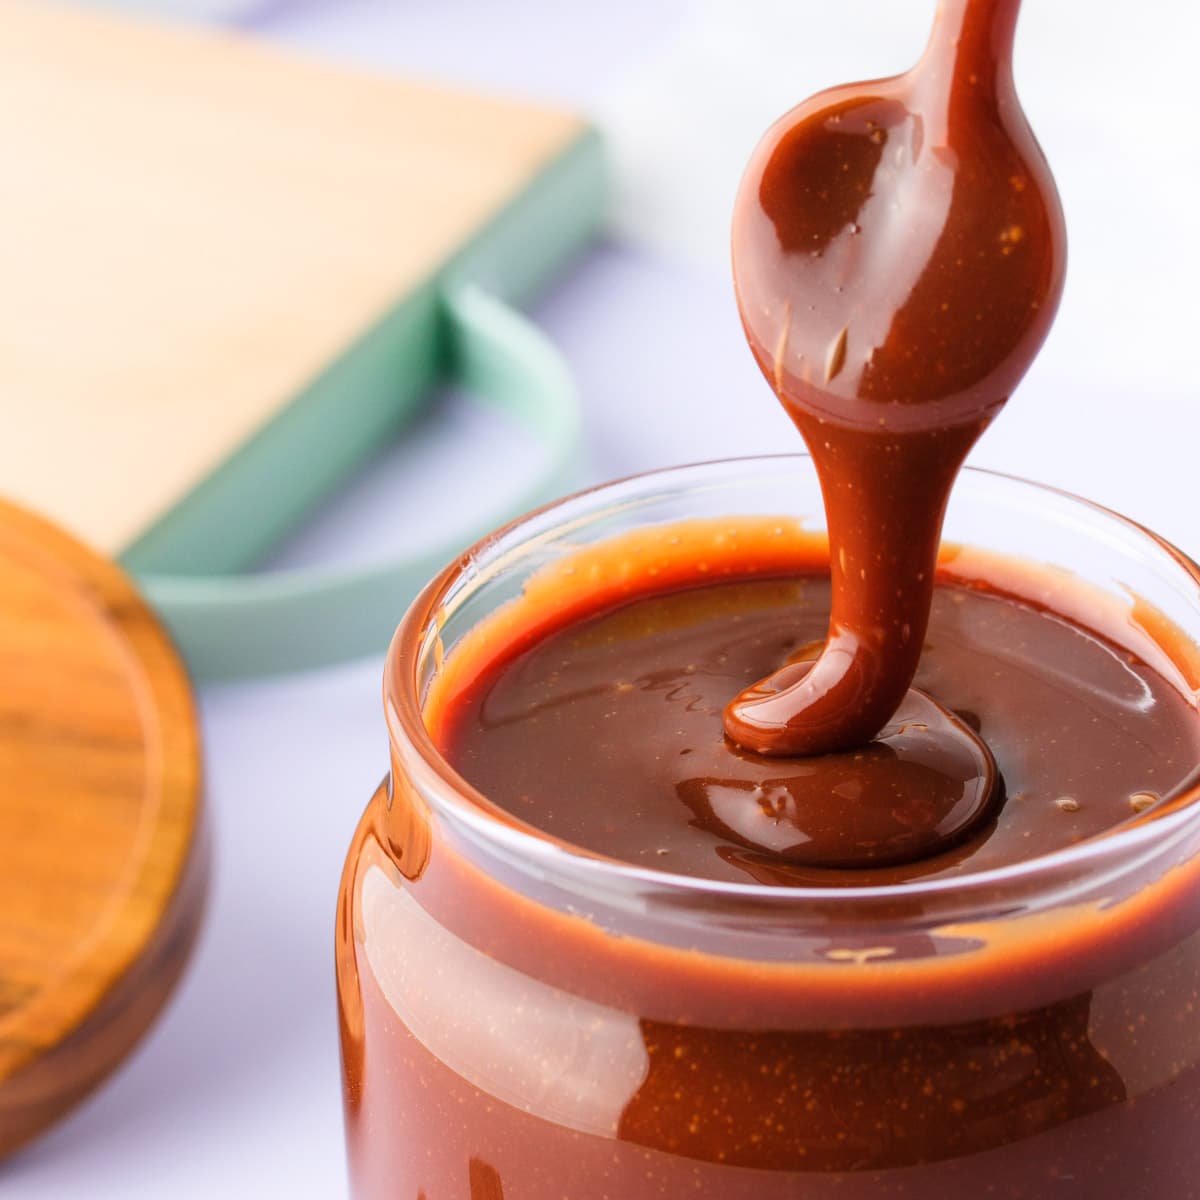 A close up of a jar of chocolate caramel sauce, with a spoon drizzling the thick sauce back into the jar.